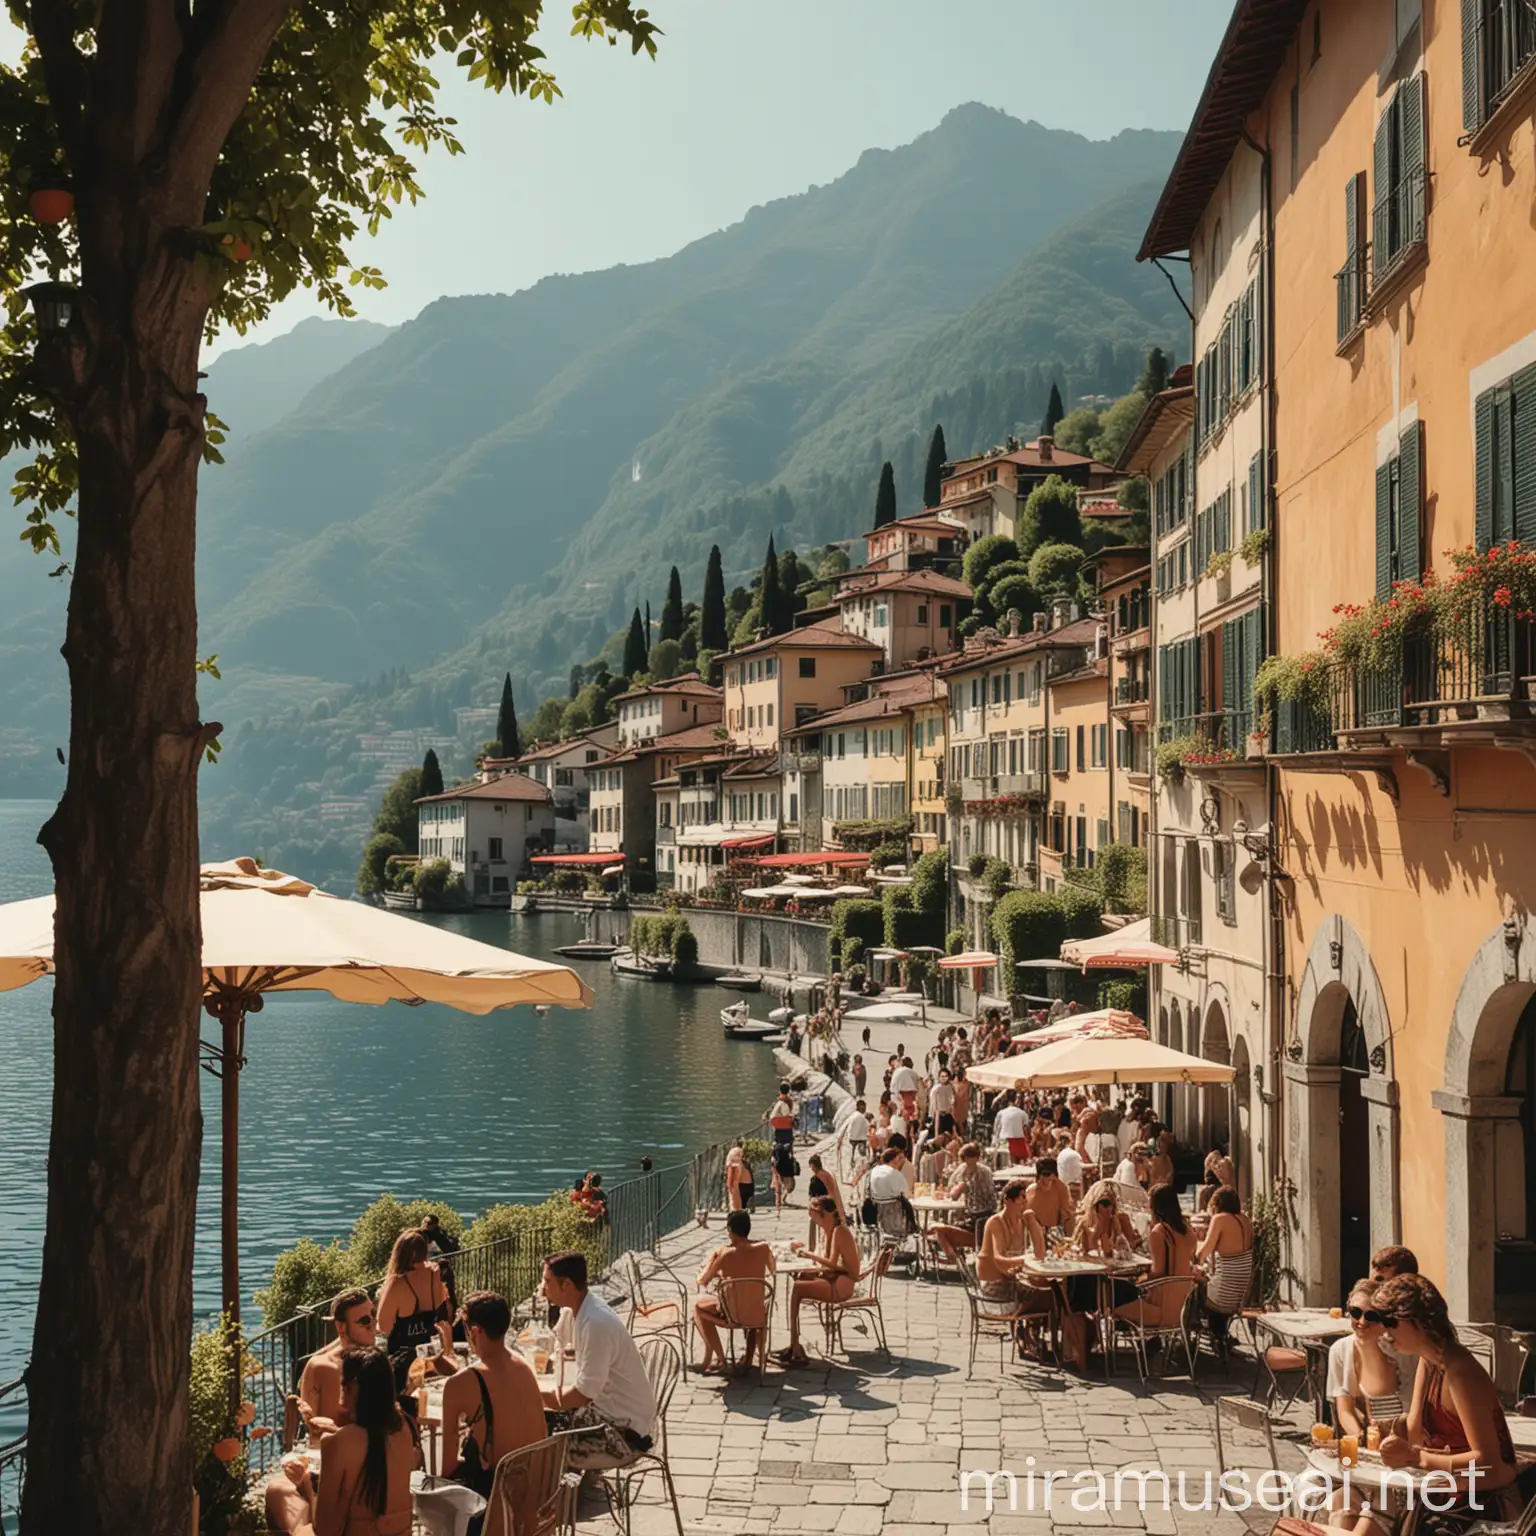 oldschool aesthetic of lake como in Italy with people hanging out and having drinks and a good time
